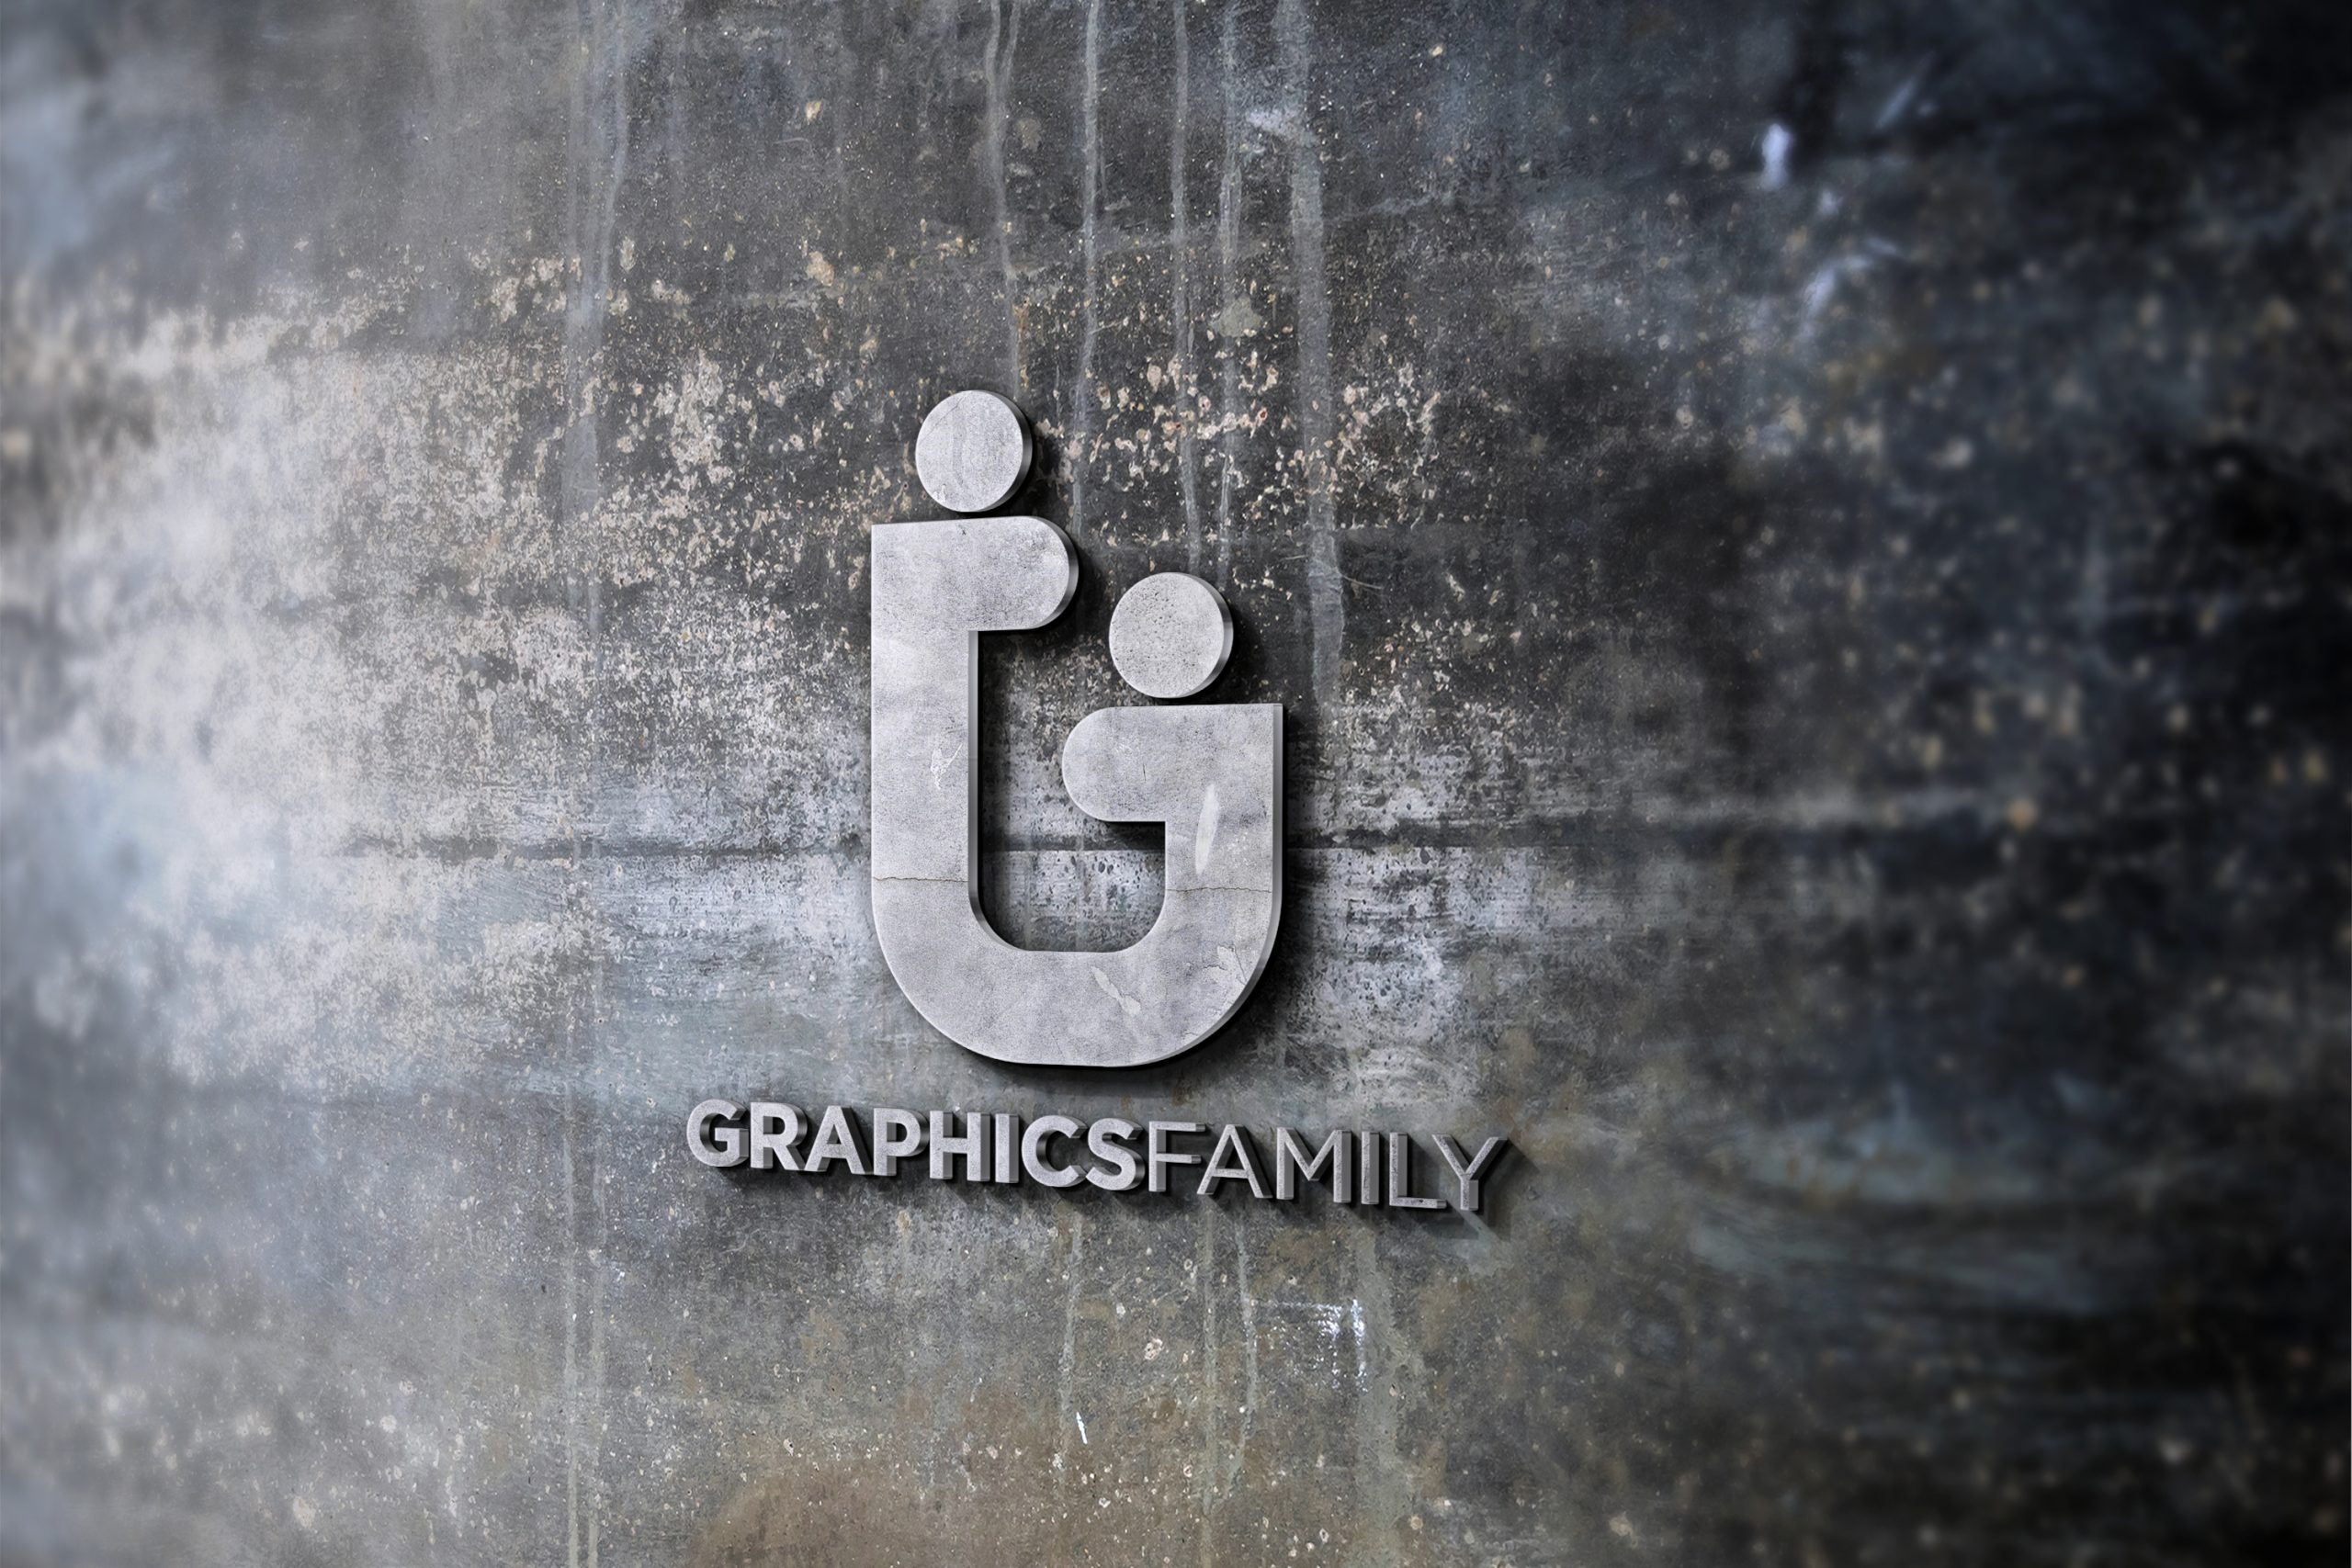 Photorealistic 3D logo and sign mockup by GraphicsFamily